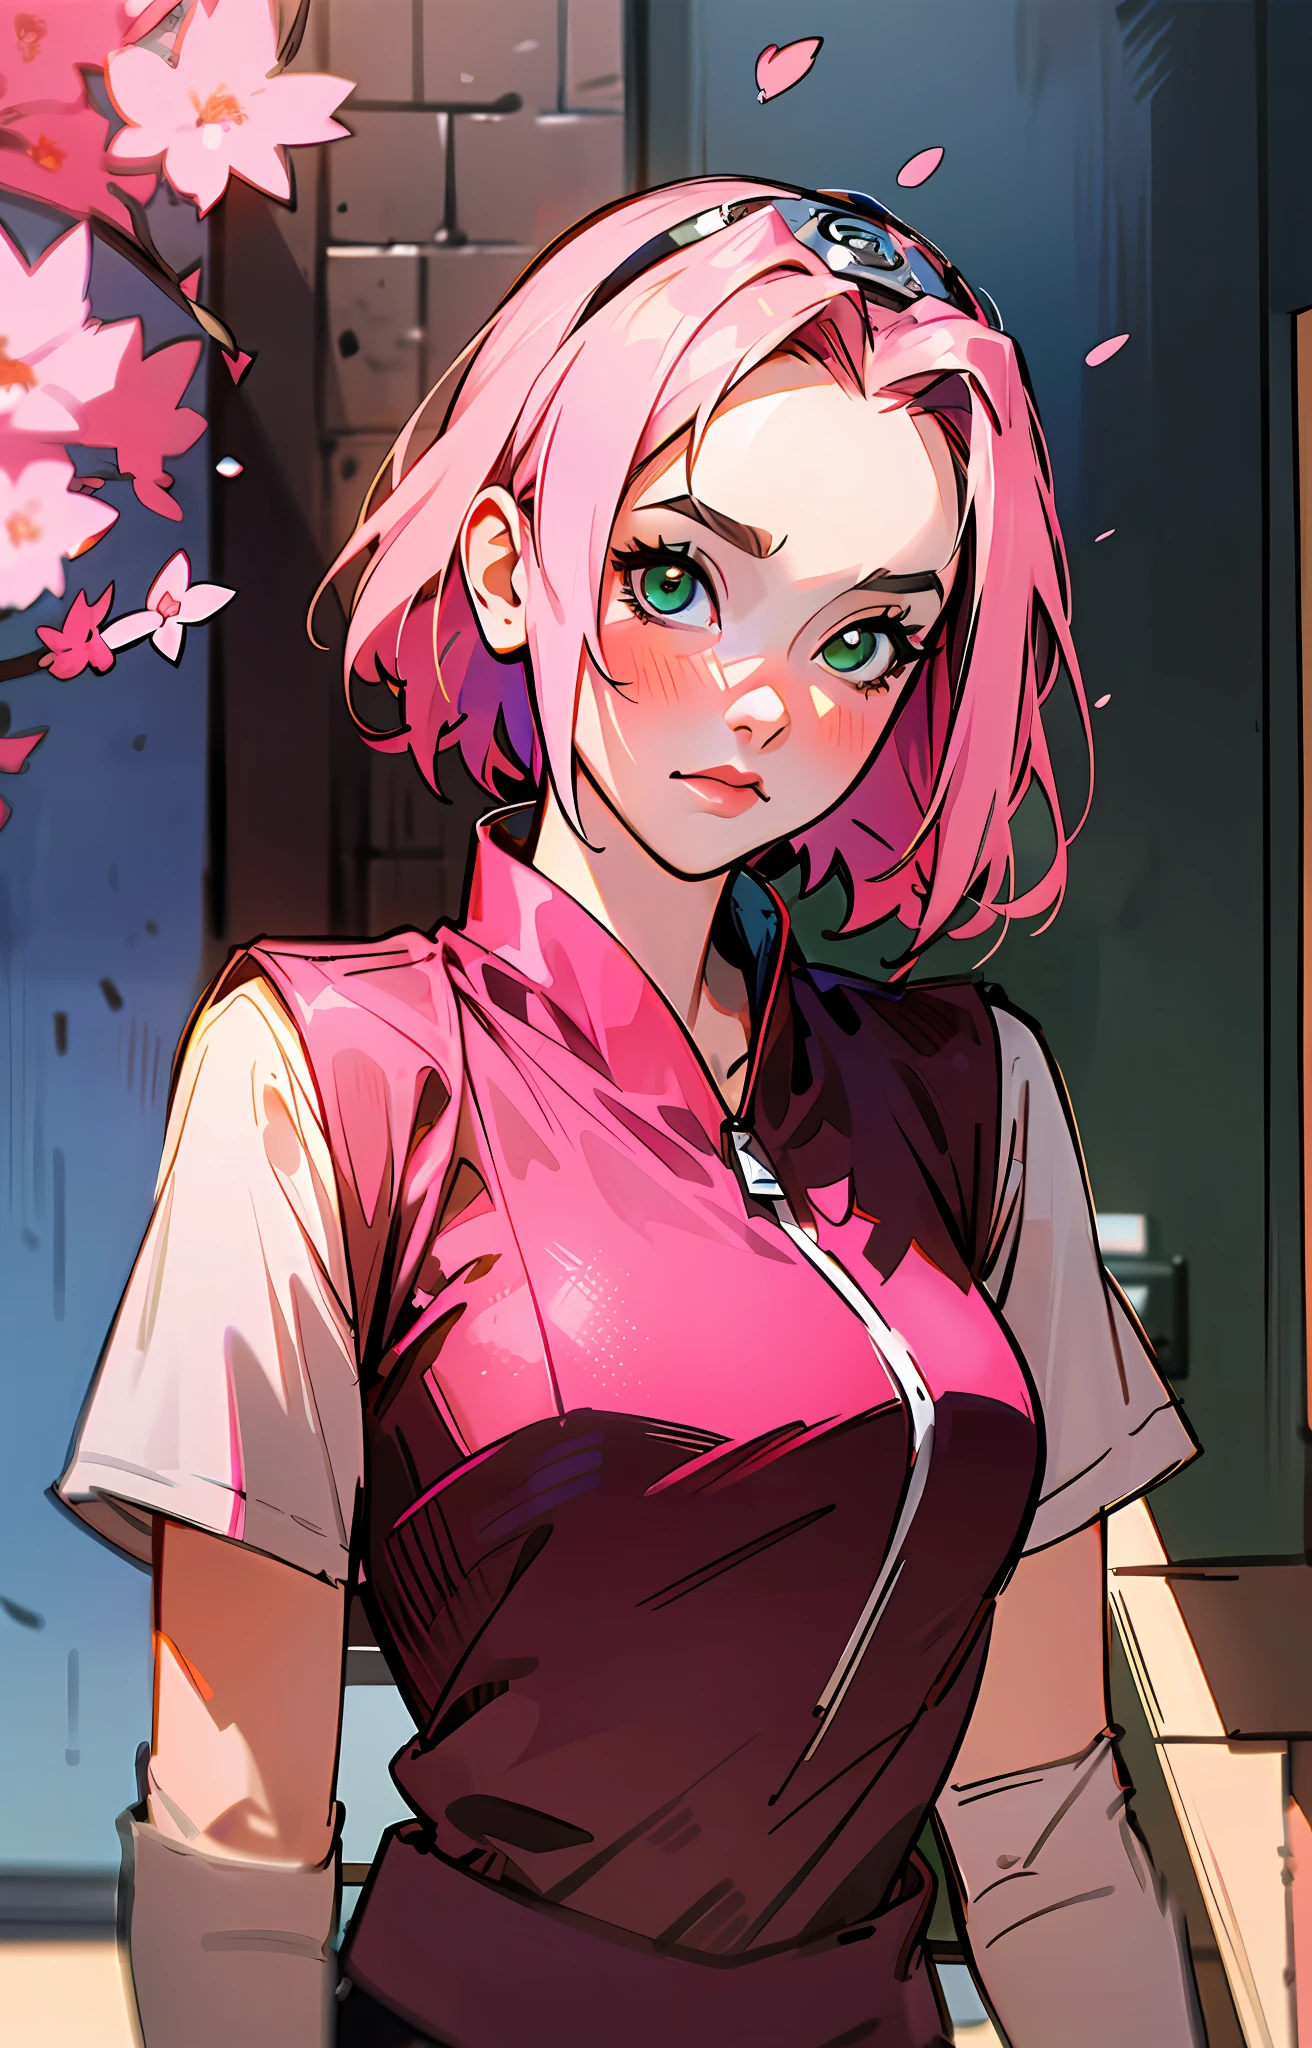 sakura haruno, ((独奏)), alone, ((head to show)), chic,wearing a red blouse and a light pink skirt,  sakura haruno em Naruto Shippuden,  she's charming, appealing, pink  hair, dainty, Youngh, shorth hair, detailded, hight definition, ((fully body)), she's in her house looking at a picture, gazing at viewer,  she's a beautiful woman ,  beautiful and nice woman, Linda, Bela, high qualiy, defined eyes, hight definition, shiny, sharp strokes, Linda, red bow in hair,trending on artstation, by rhads, andreas rocha, rossdraws, makoto shinkai, laurie greasley, lois van baarle, ilya kuvshinov and greg rutkowski